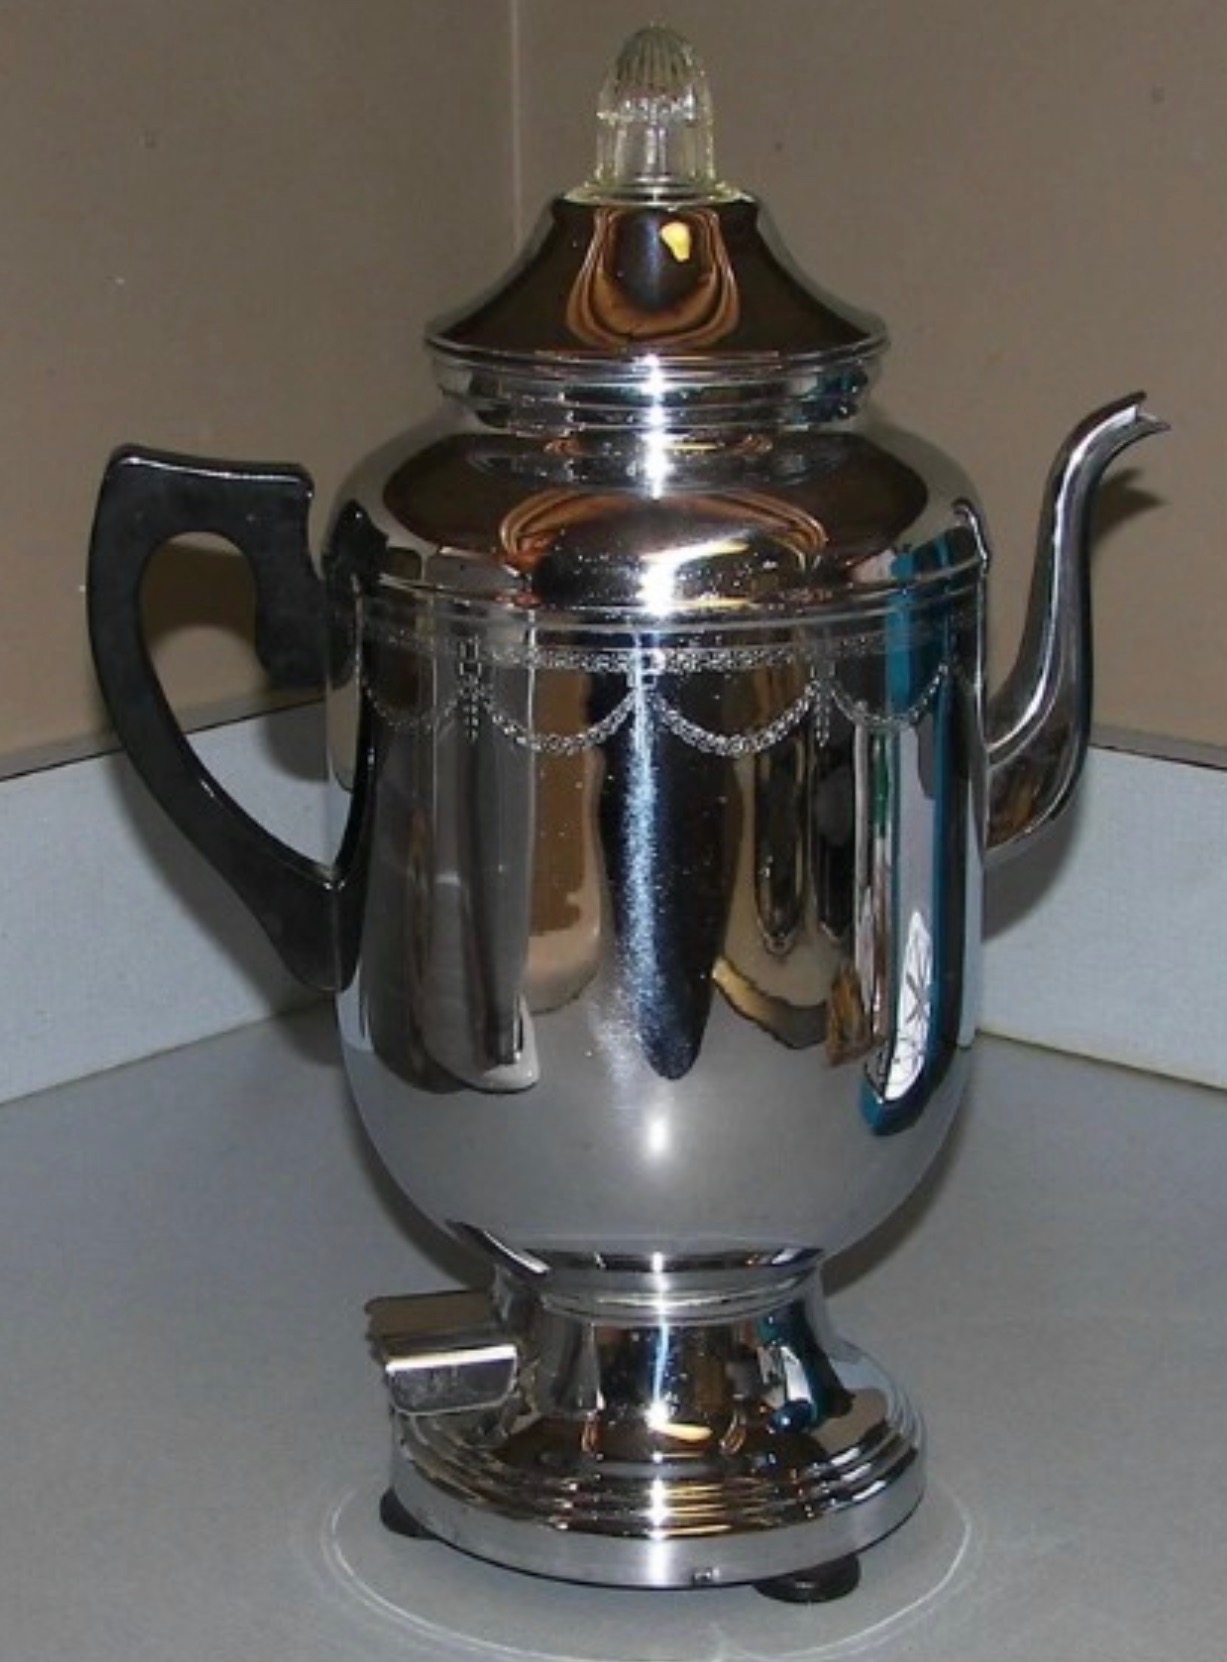 This is a photo of the percolator used by the Gardner women in the 50s - about Ava Gardner on Breakfast At Dominique's